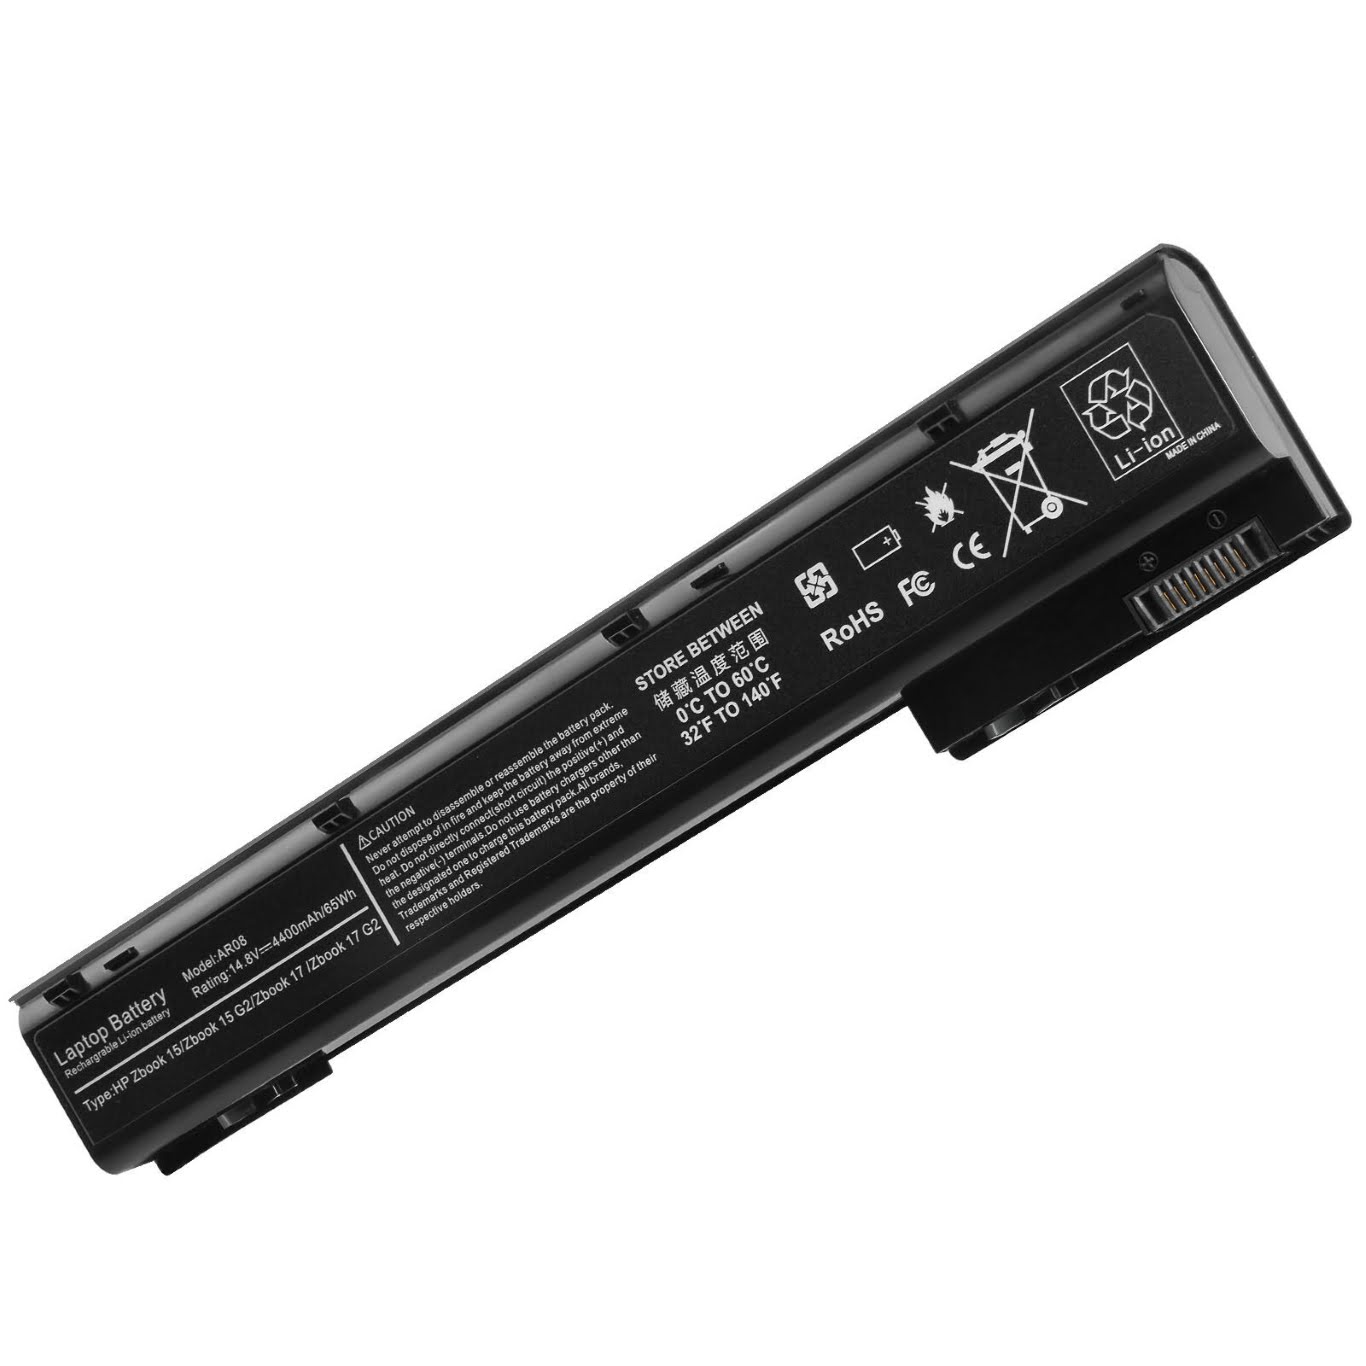 1588-3003, 707614-121 replacement Laptop Battery for HP ZBook 15Mobile Workstation Series, ZBook 17 G1 Series, 8 cells, 14.8V, 4400mAh